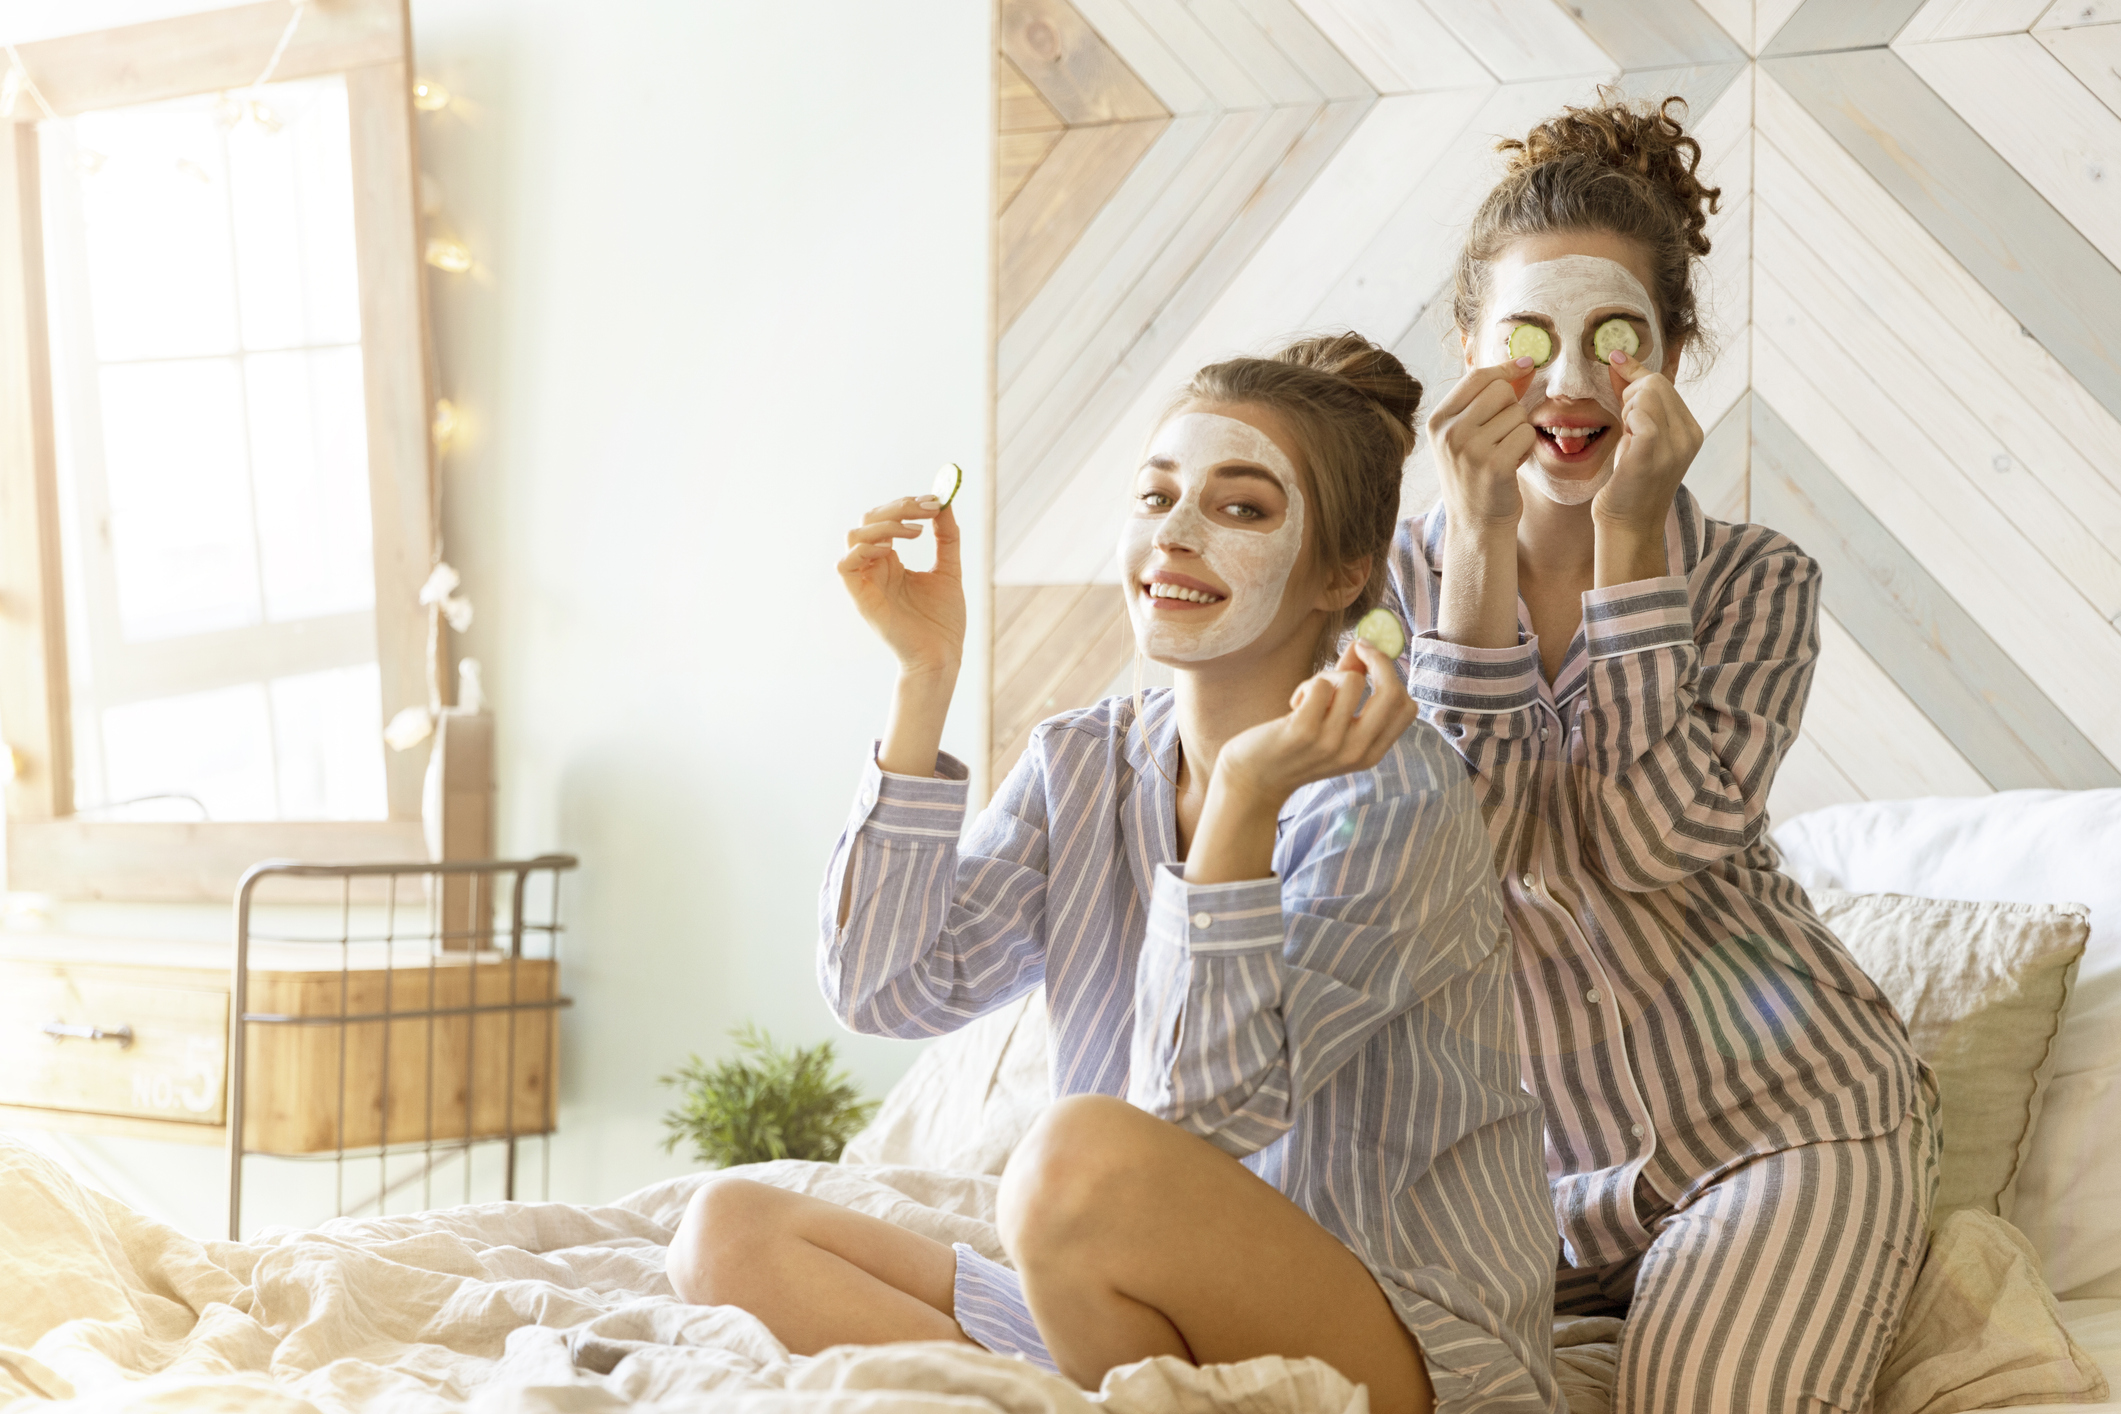 Portrait of blessed models in beauty-mask for face in comfortable bedroom. Beautifel women spending funny time together and posing for camera on bed. Blurred background